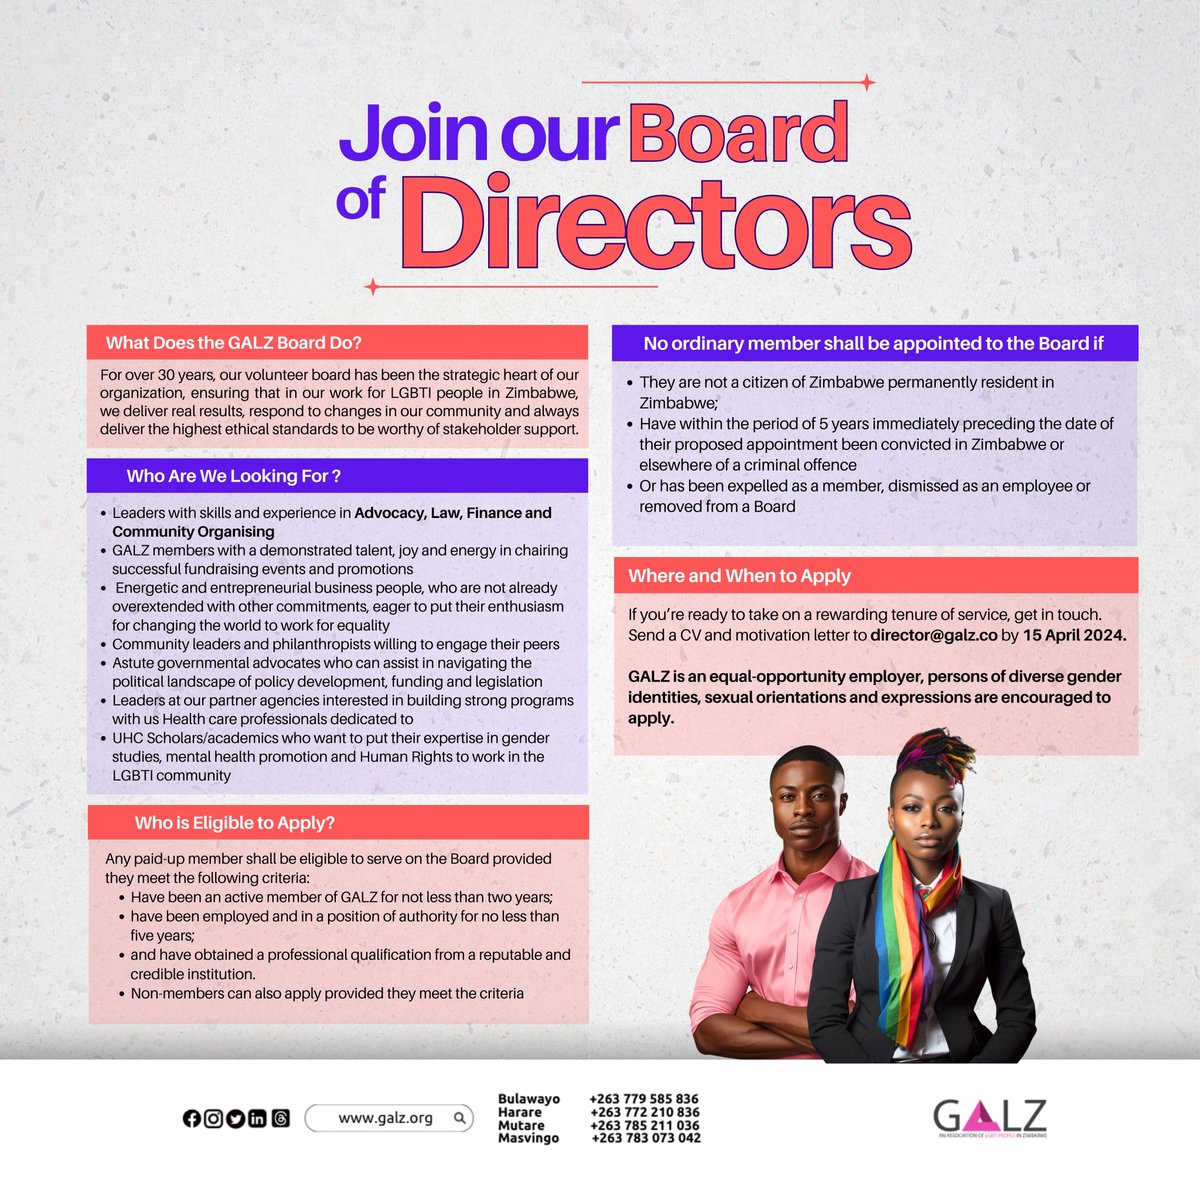 We are seeking visionary leaders to join our Board of Directors. As a Board member, you'll play a crucial role in shaping GALZ's strategic direction and driving positive change for our community. Don't miss this chance to lead the way. #GALZBoard #LeadersWanted #ApplyNow